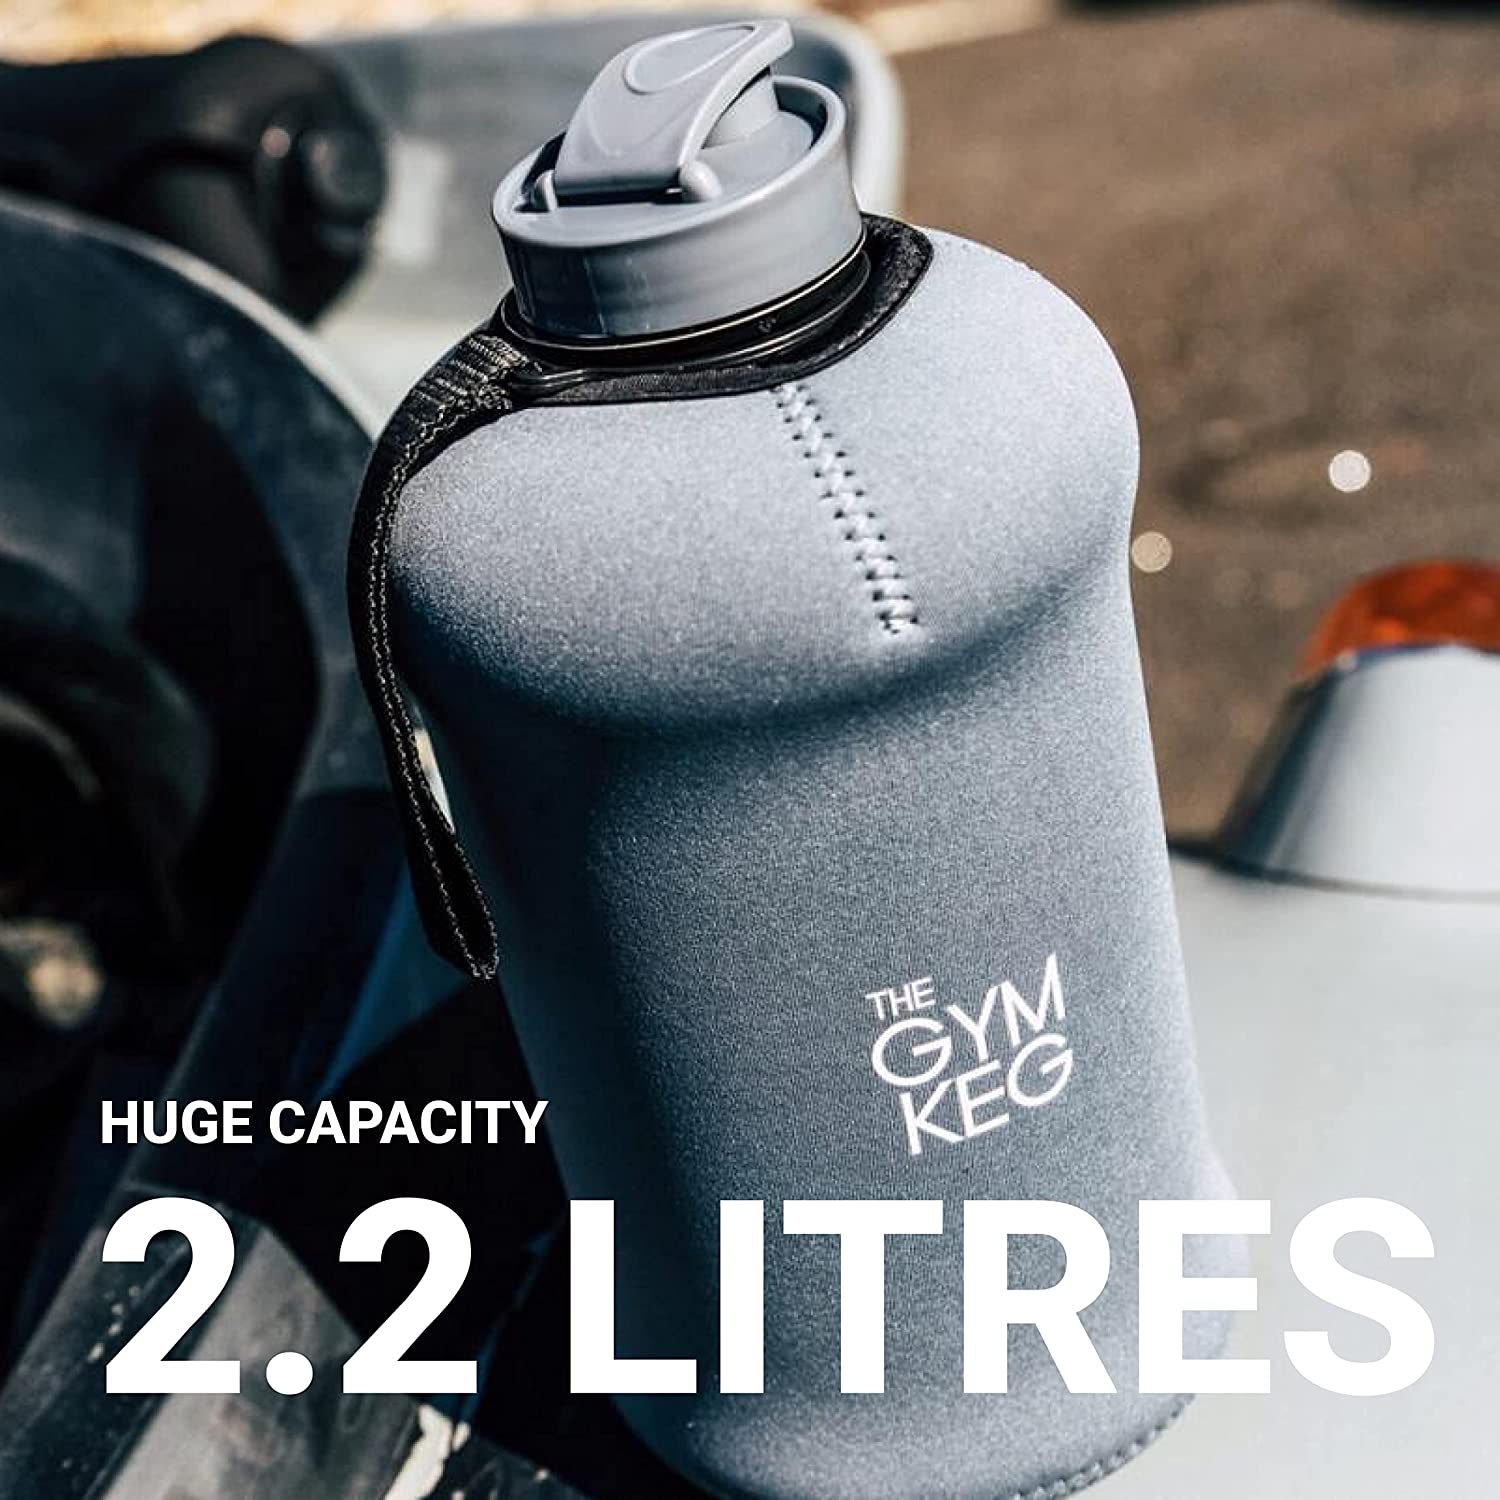 THE GYM KEG Sports Water Bottle (2.2 L) Insulated | Half Gallon | Carry Handle | Big Water